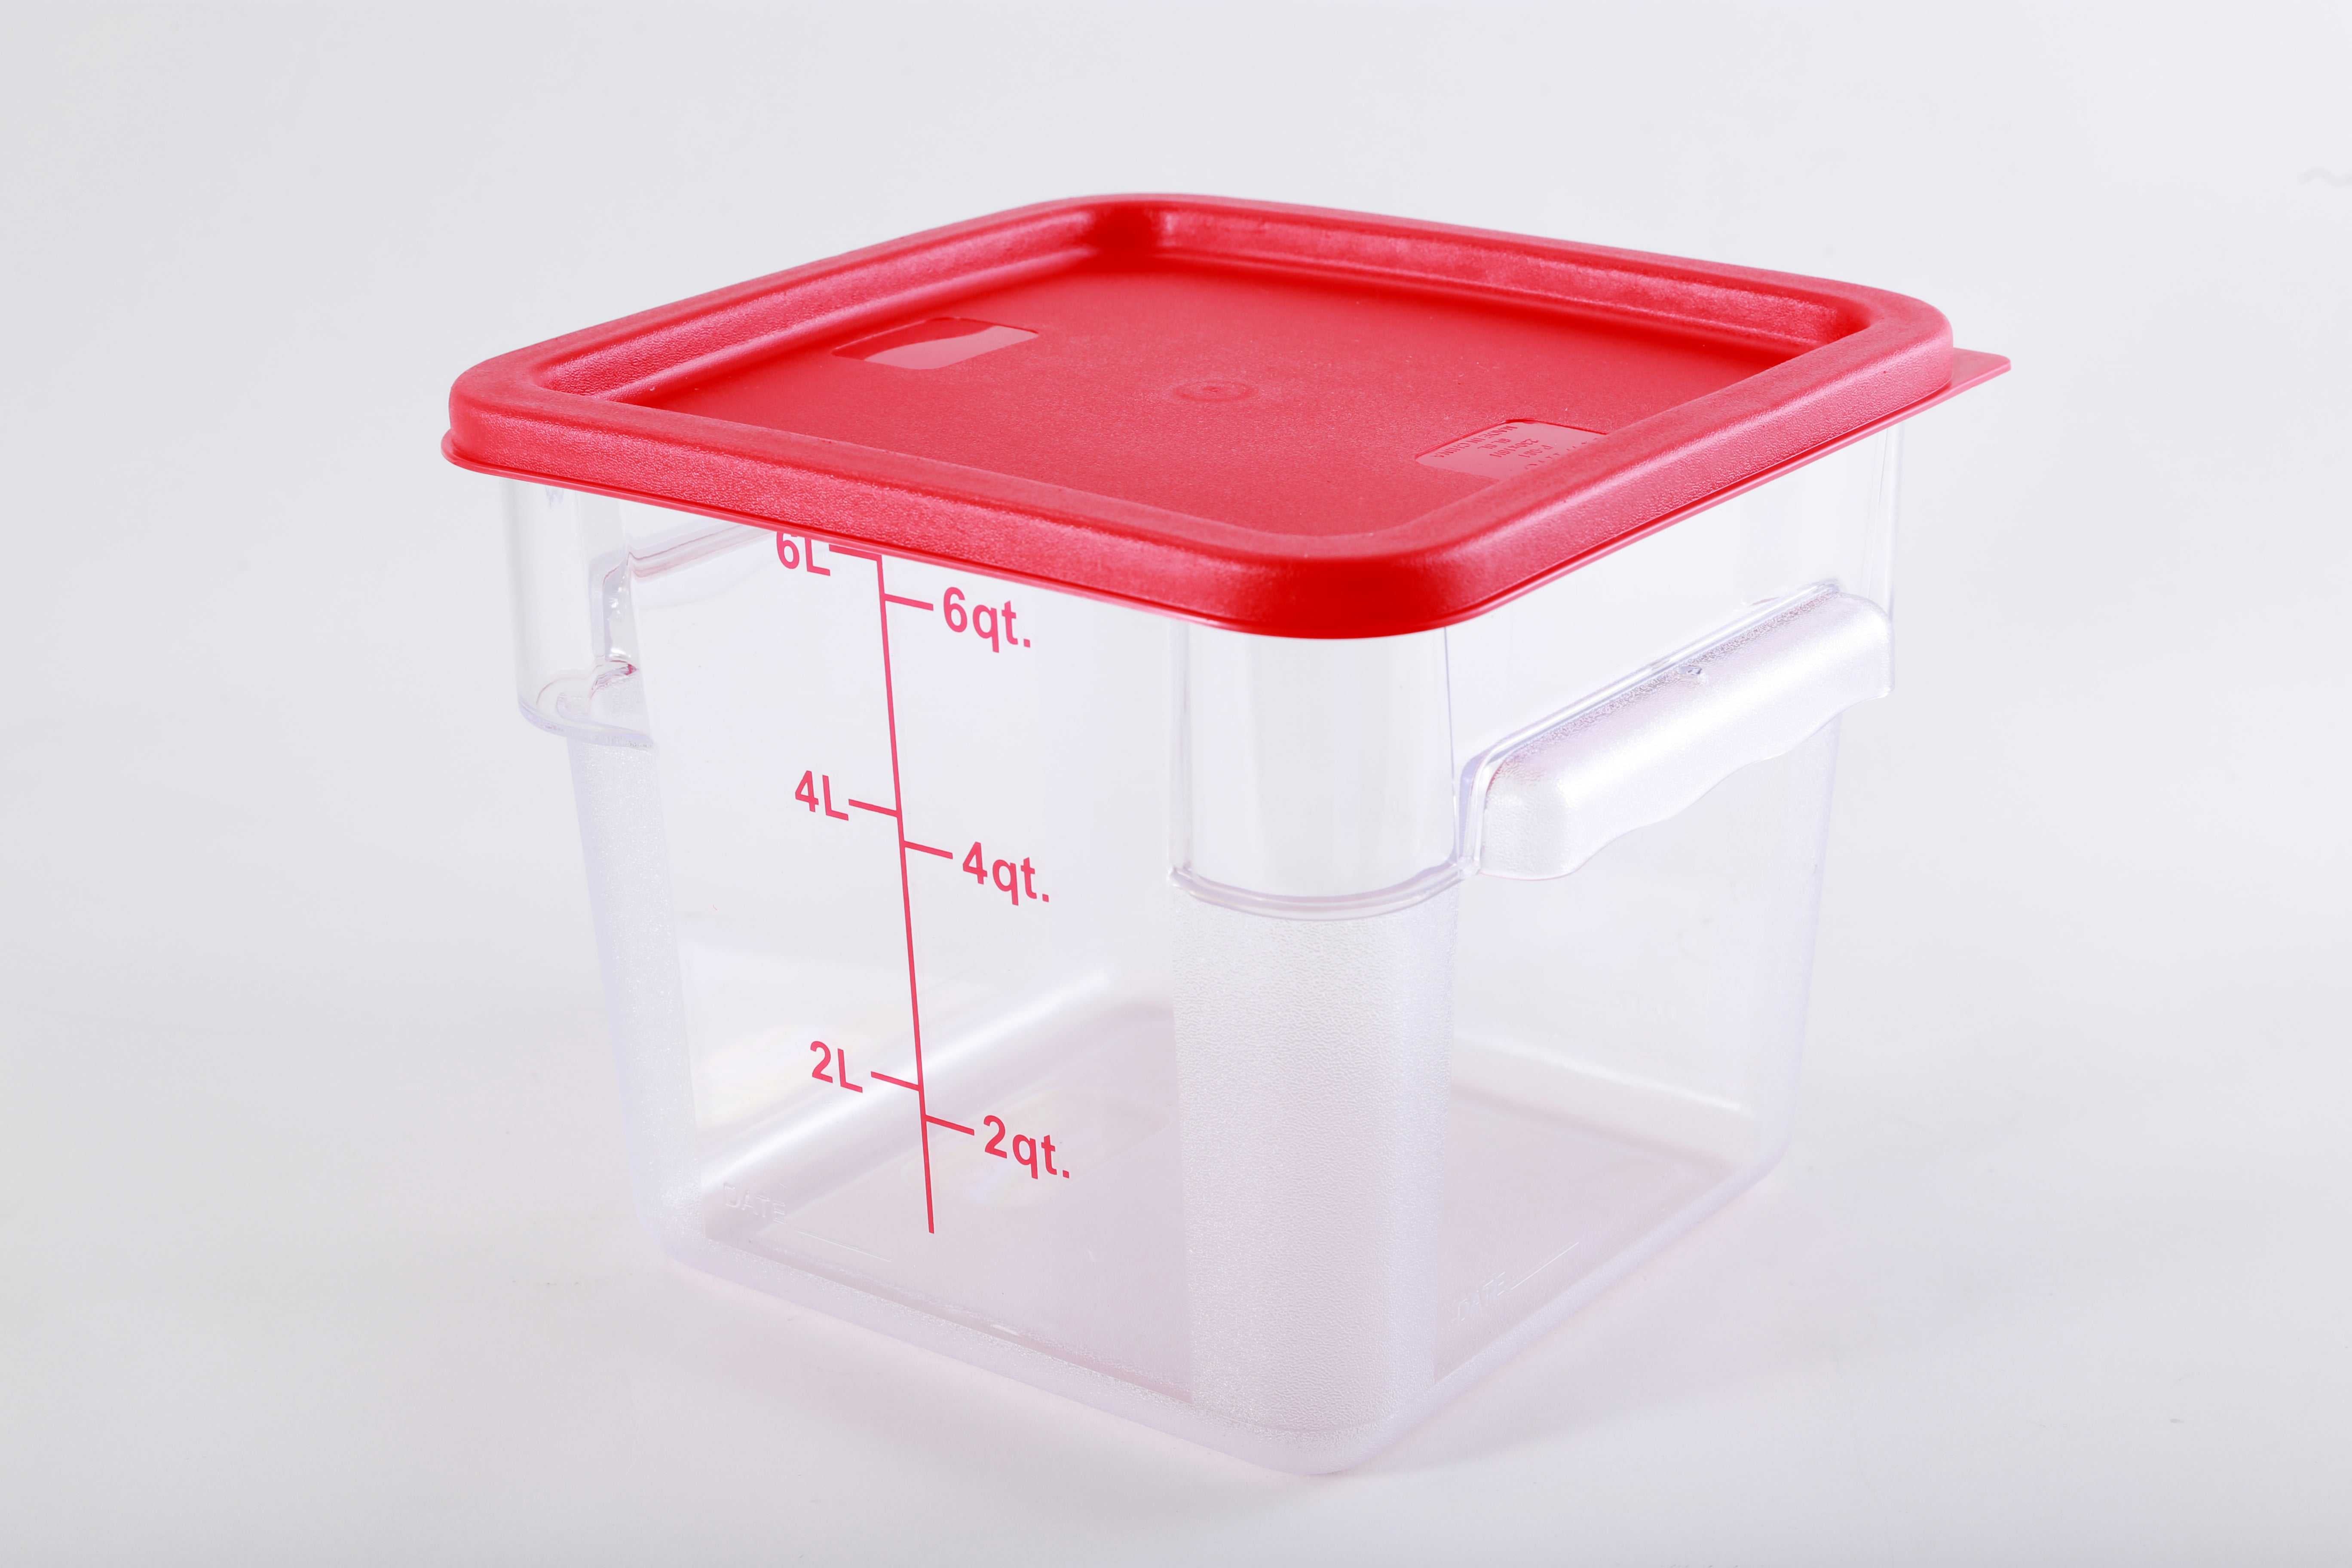 TigerChef 6 Quart Commercial Grade Clear Food Storage Square Polycarbonate  Containers With Red Lids